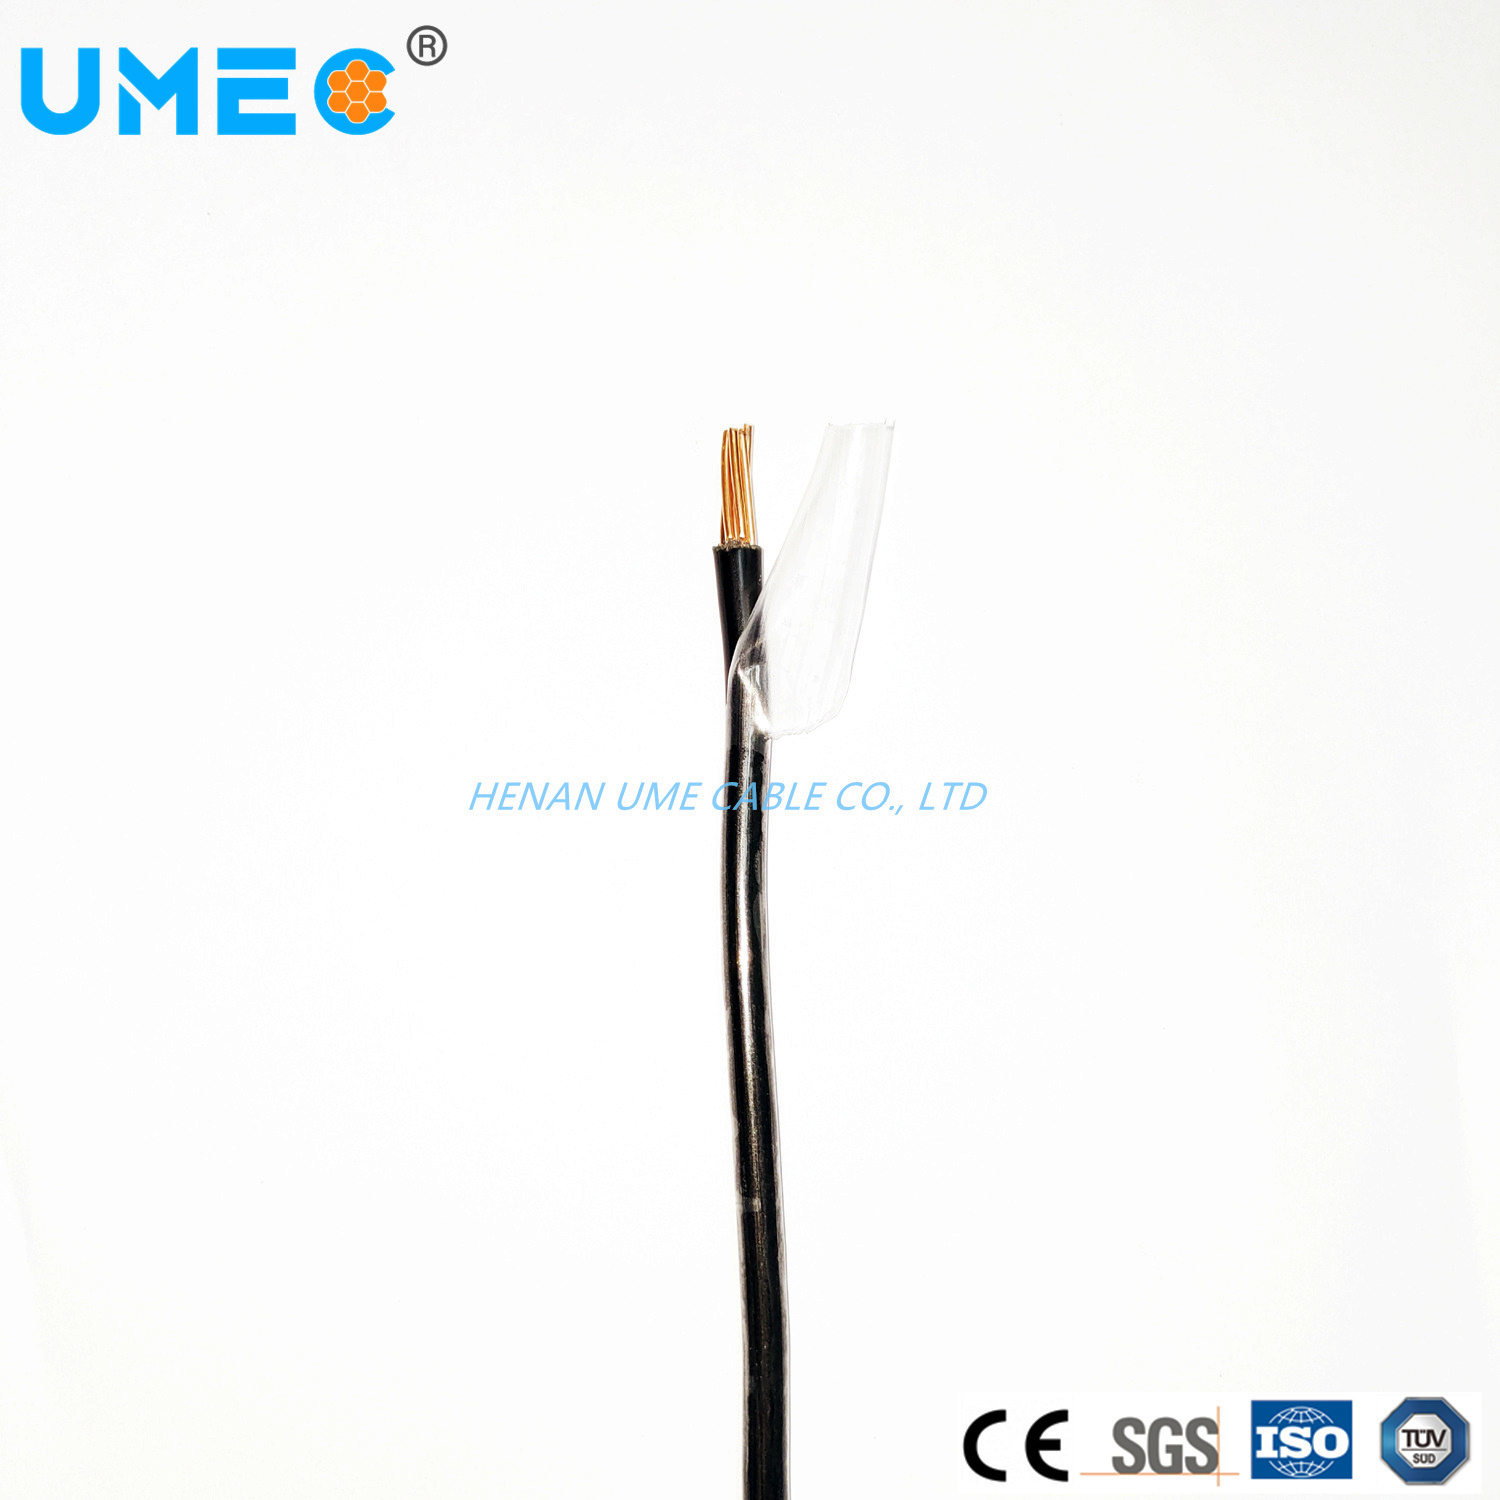 Thermoplastic High Heat-Resistant PVC Insulated Nylon-Coated Thhn Wire